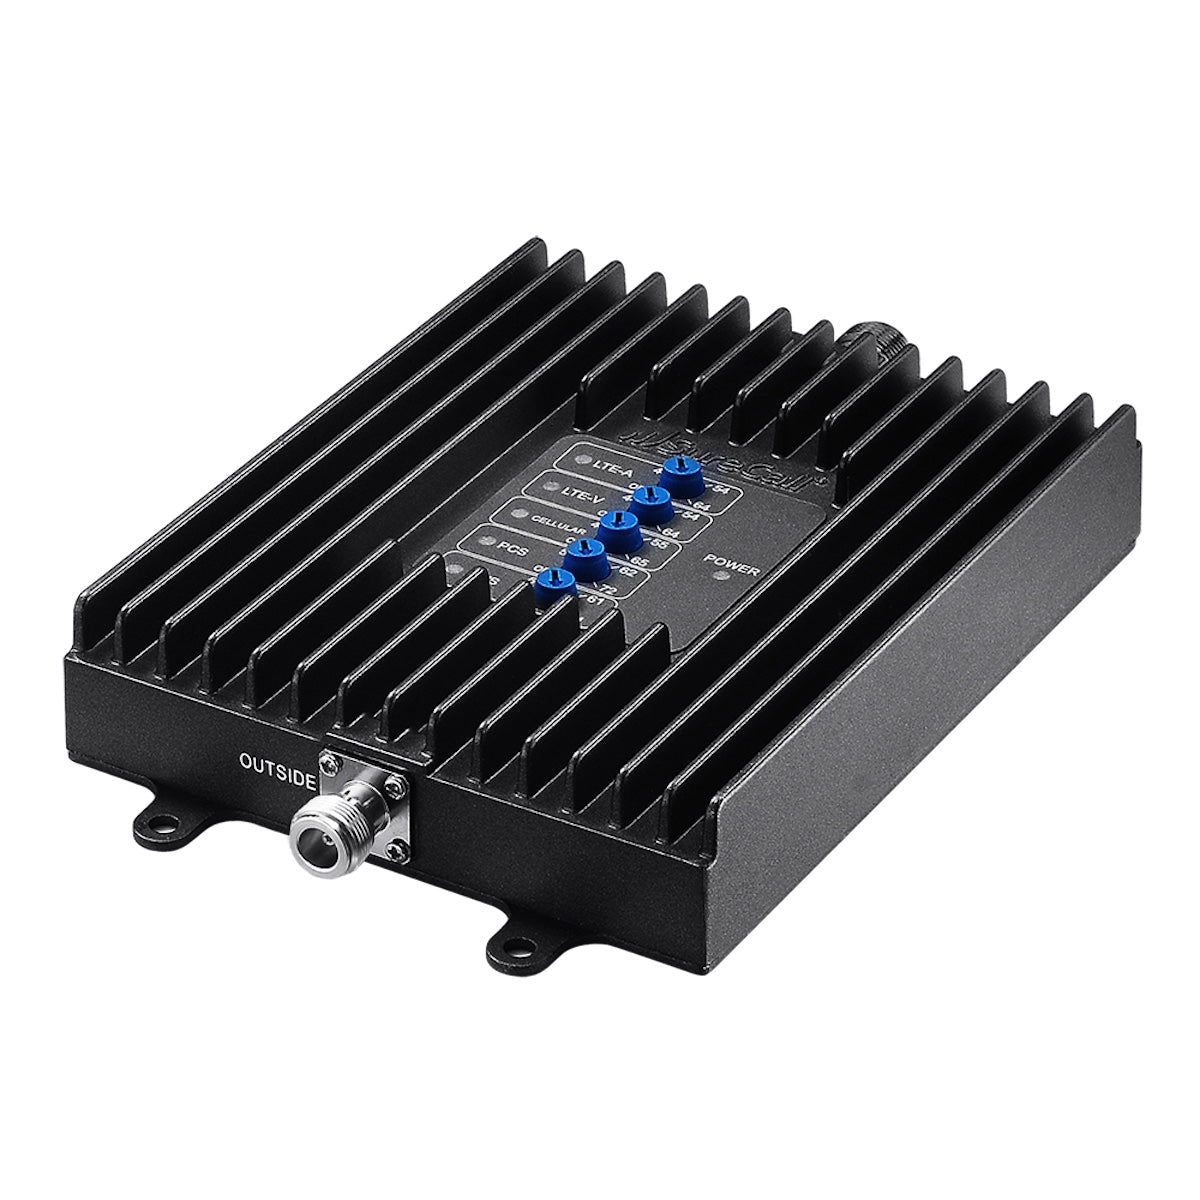 Fusion Professional Signal Booster Kit